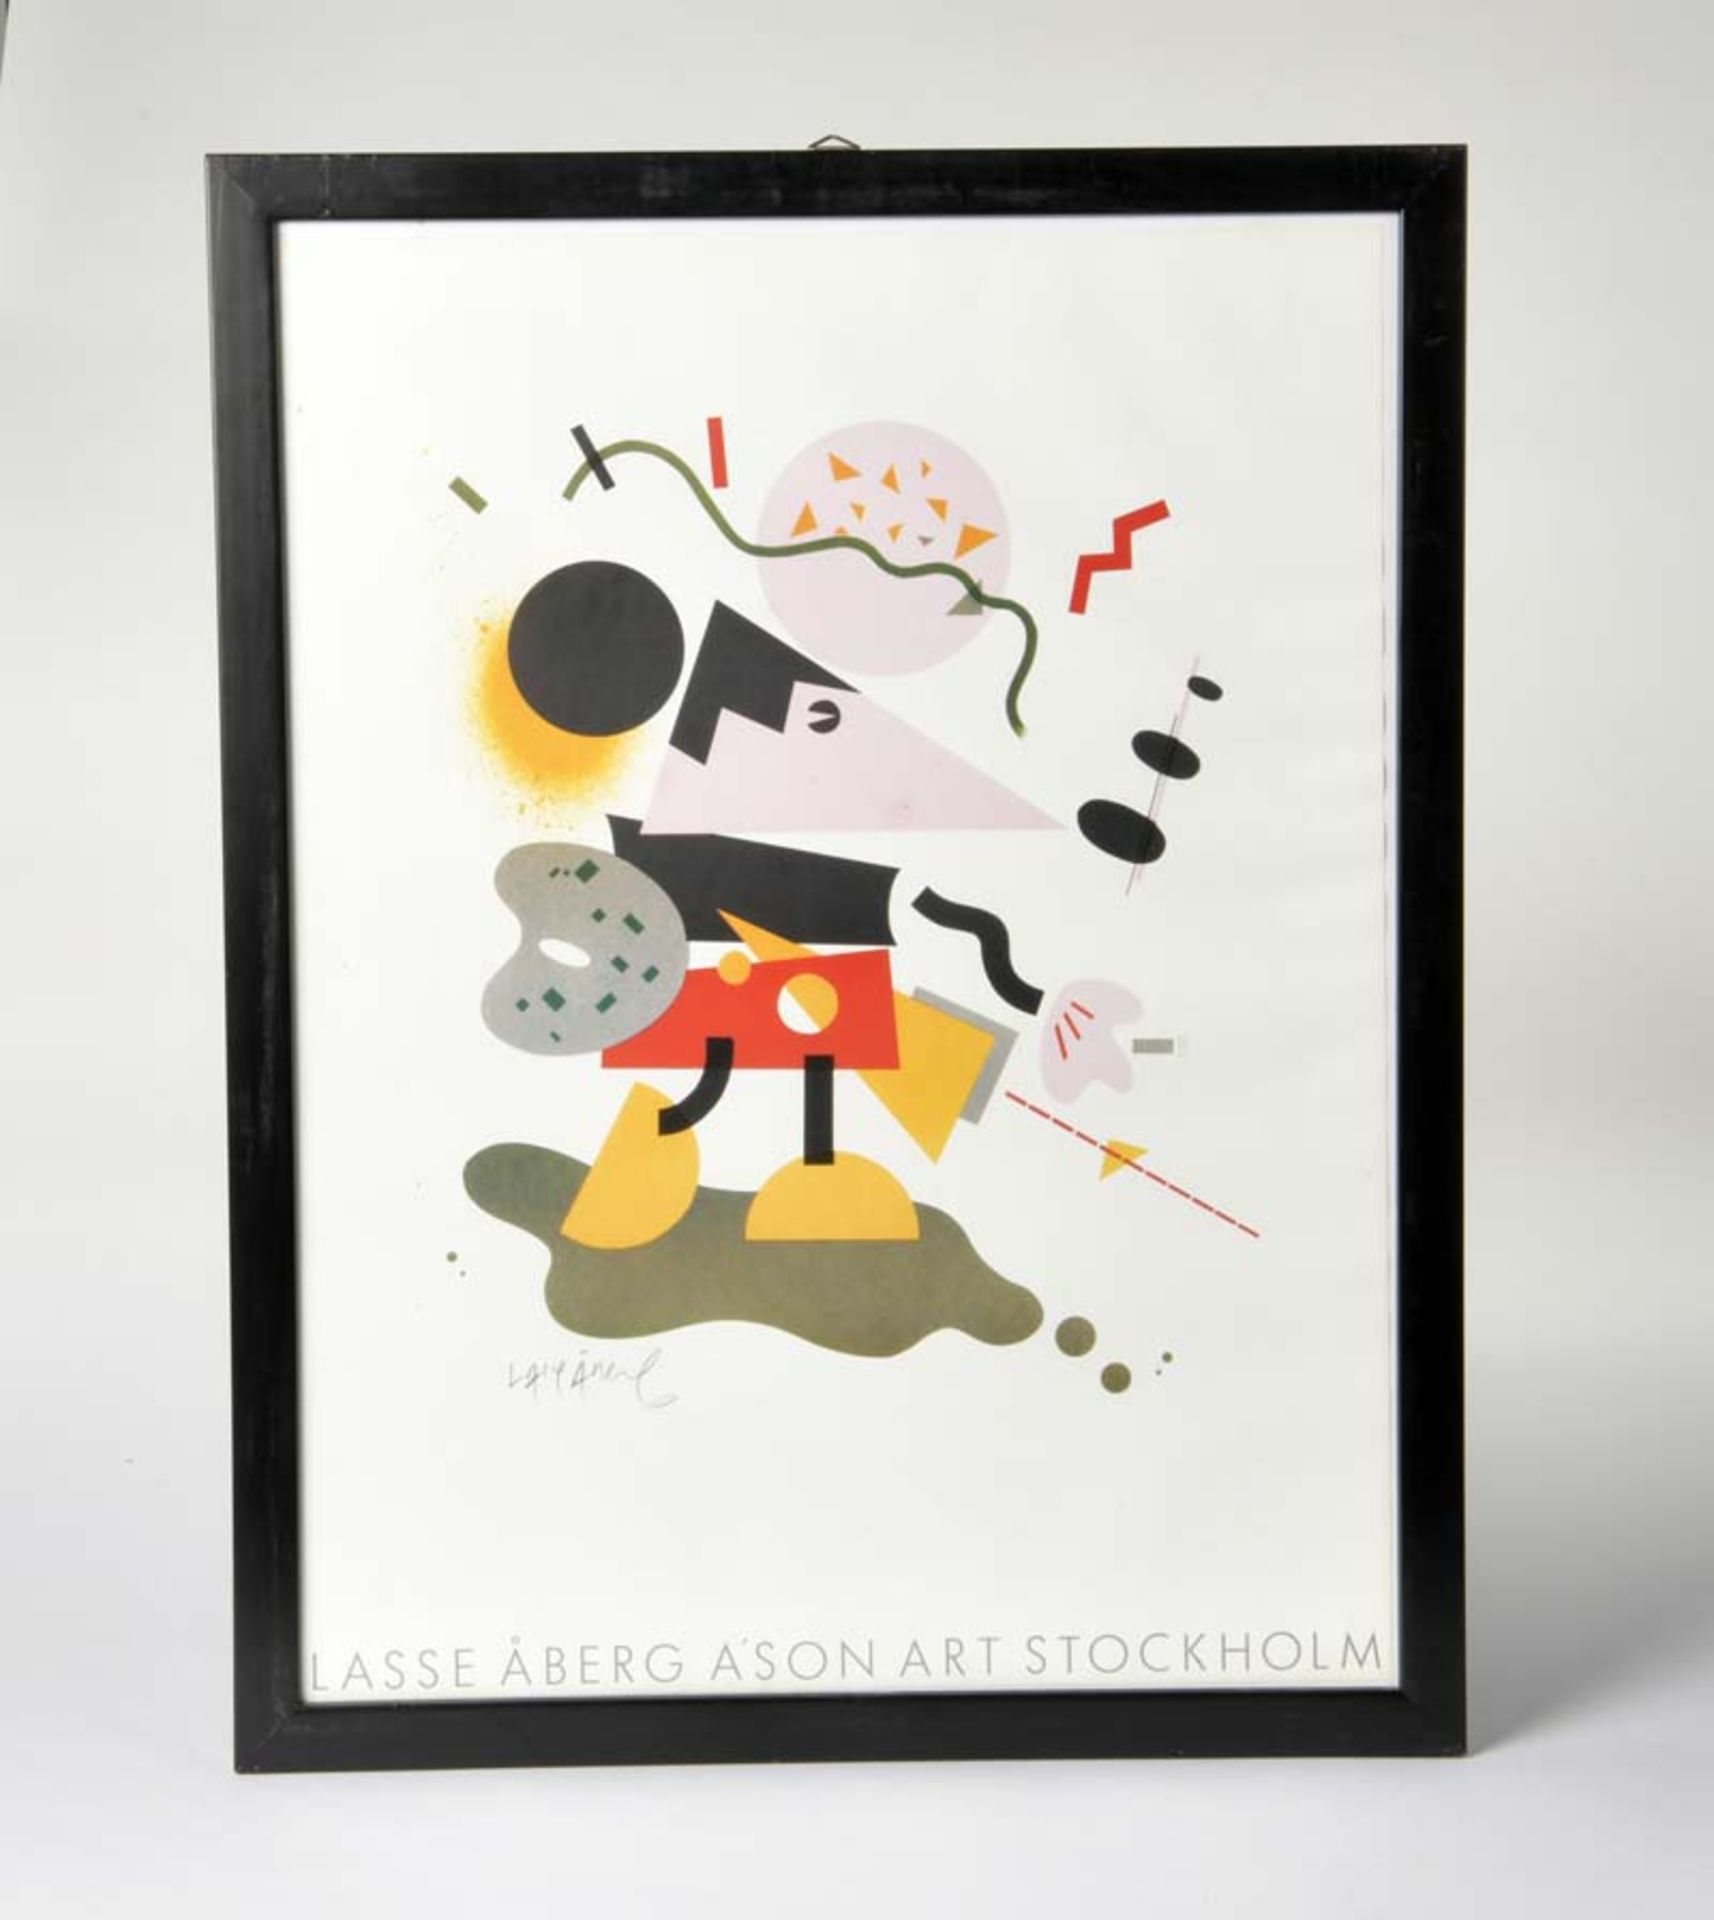 Poster Lasse Aberg Ason Art Stockholm, Mickey as Artist, framed, only shipping without frame, C